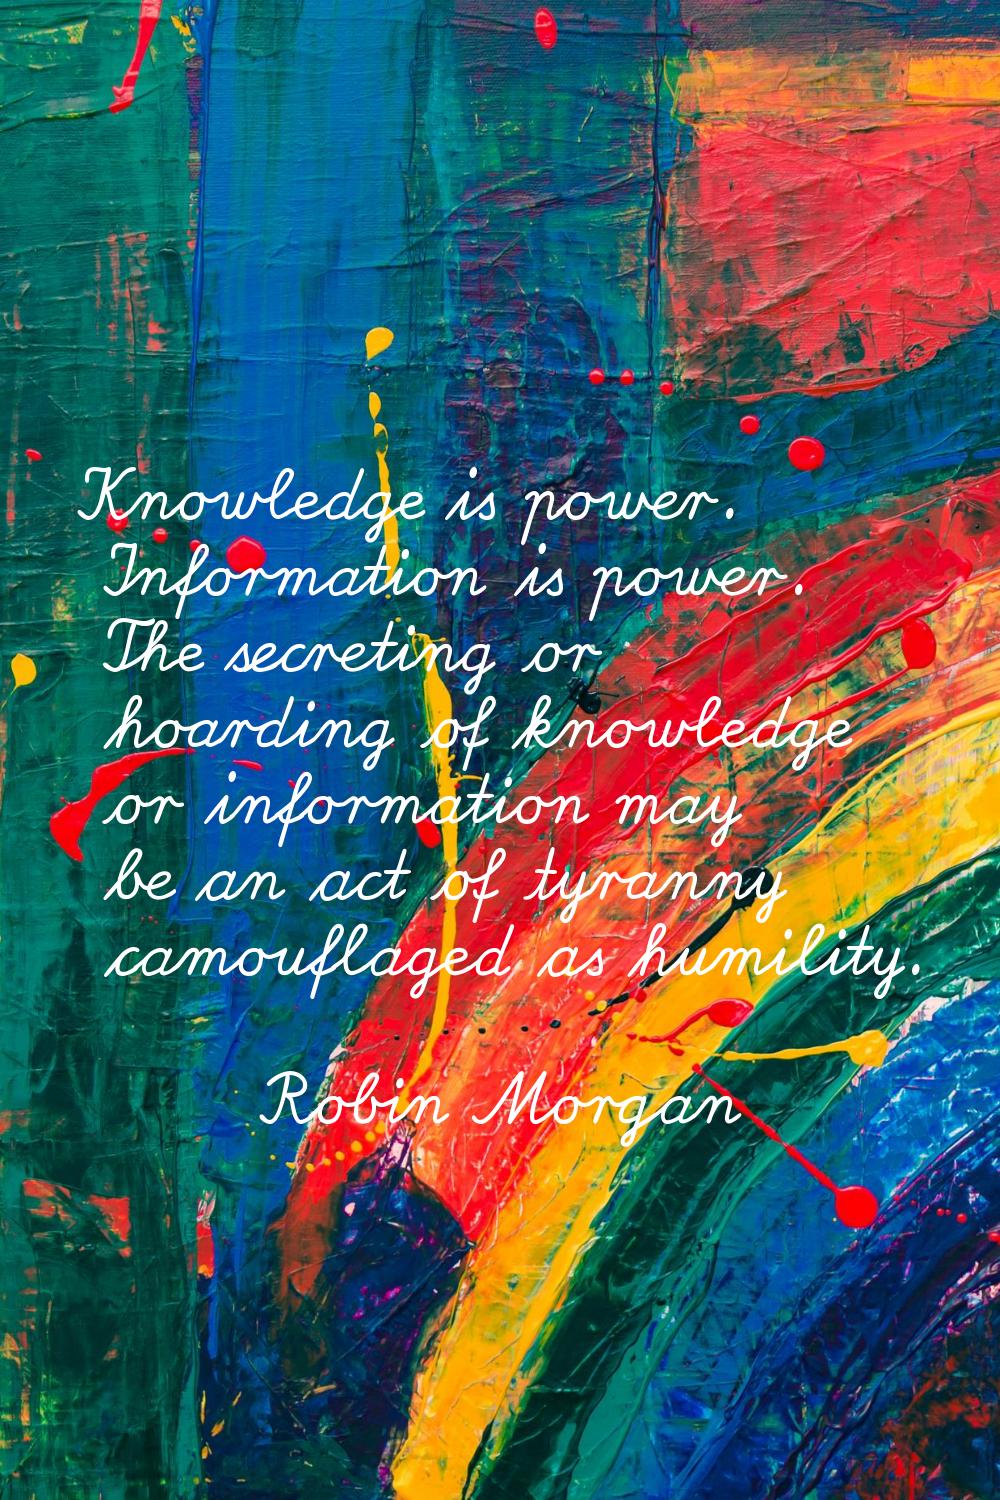 Knowledge is power. Information is power. The secreting or hoarding of knowledge or information may